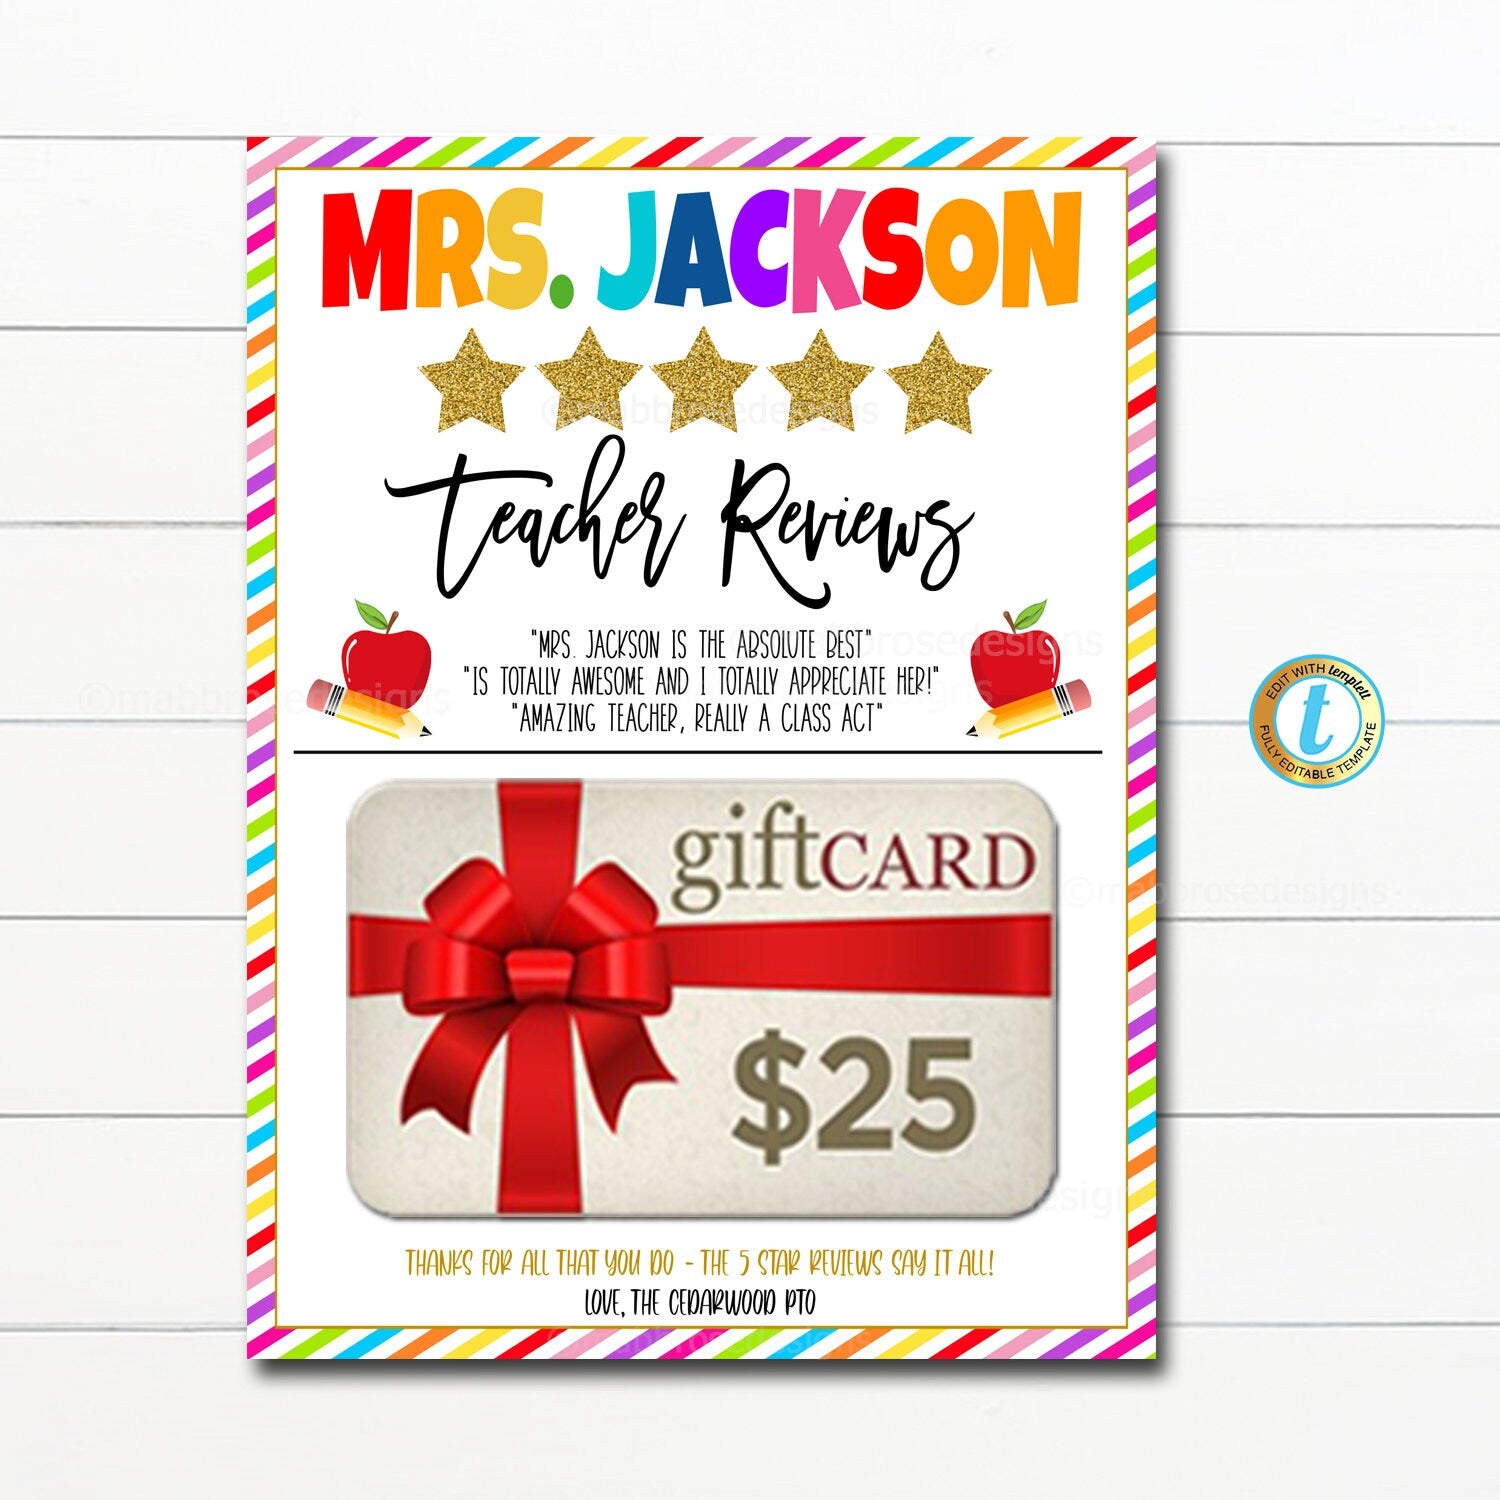 How to Buy a TPT Gift Card (and make it look great!) - Mrs. ReaderPants